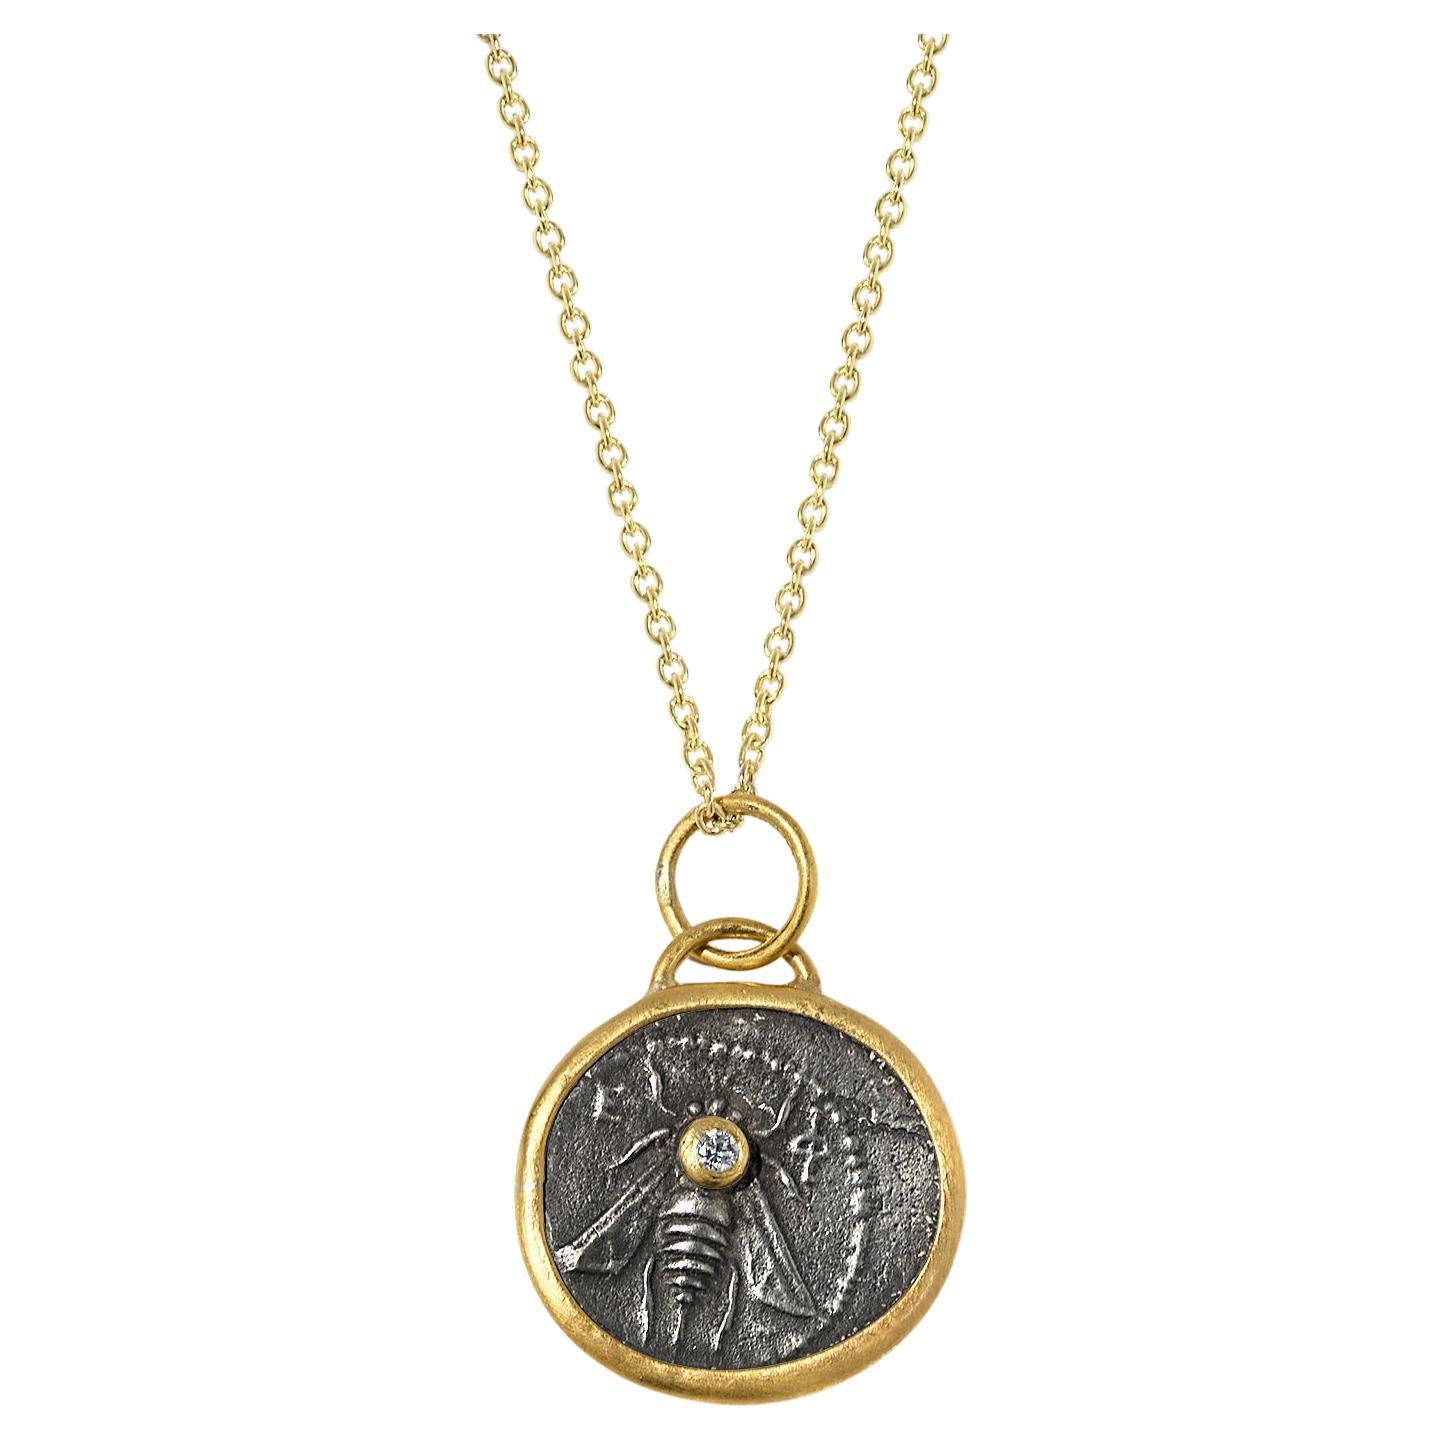 Queen Bee, Ephesus Coin, Tetra Drachm, Pendant Necklace Charm Coin Amulet with D